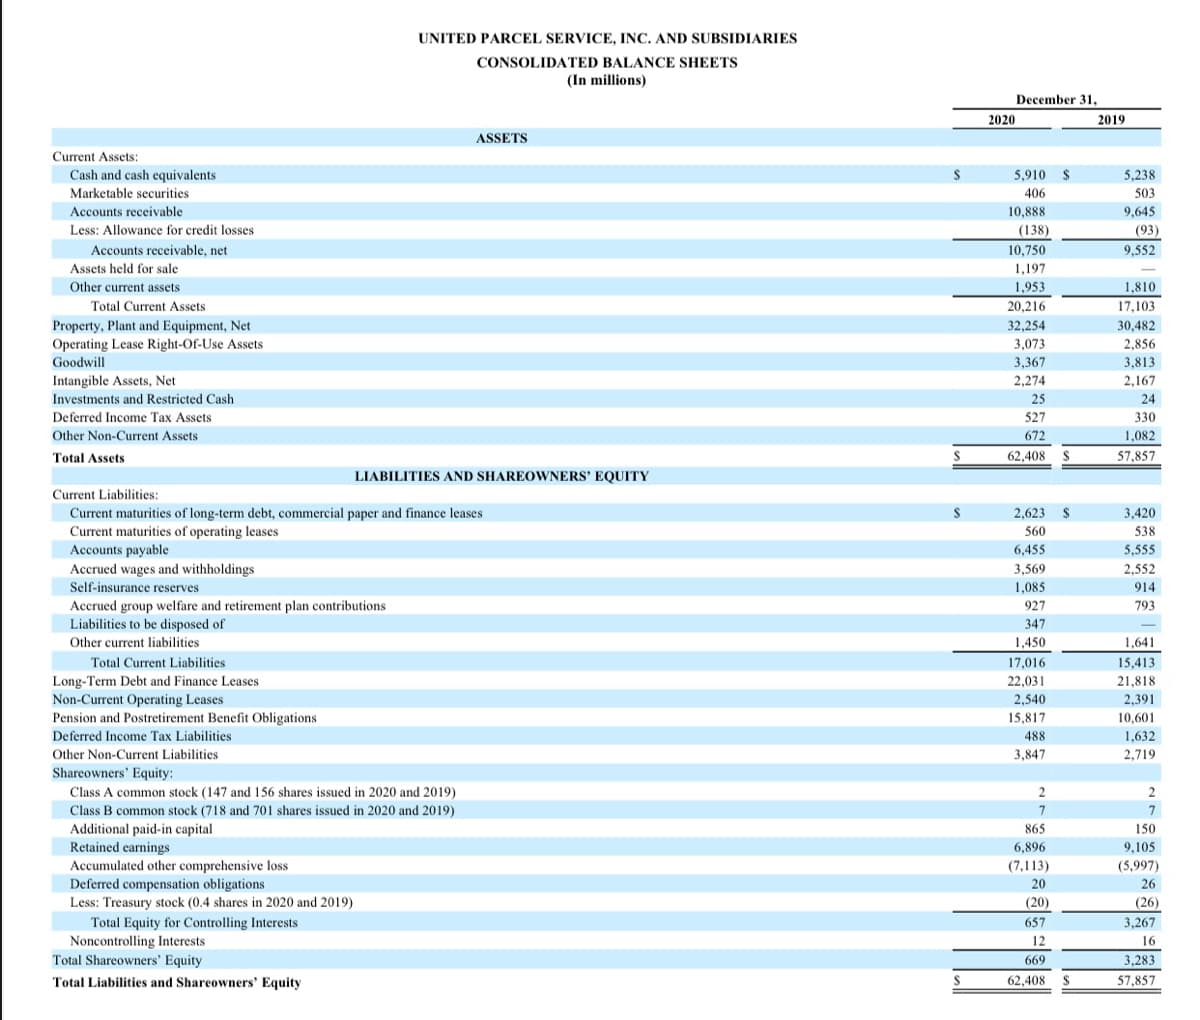 UNITED PARCEL SERVICE, INC. AND SUBSIDIARIES
CONSOLIDATED BALANCE SHEETS
(In millions)
December 31,
2020
2019
ASSETS
Current Assets:
Cash and cash equivalents
5,910 $
5,238
Marketable securities
406
503
Accounts receivable
10,888
9,645
Less: Allowance for credit losses
(138)
(93)
Accounts receivable, net
10,750
9,552
Assets held for sale
1,197
Other current assets
1,953
1,810
Total Current Assets
20,216
17,103
Property, Plant and Equipment, Net
Operating Lease Right-Of-Use Assets
Goodwill
32,254
30,482
3,073
2,856
3,367
3,813
Intangible Assets, Net
Investments and Restricted Cash
2,274
2,167
25
24
Deferred Income Tax Assets
527
330
Other Non-Current Assets
672
1,082
Total Assets
62,408 $
57,857
LIABILITIES AND SHAREOWNERS' EQUITY
Current Liabilities:
Current maturities of long-term debt, commercial paper and finance leases
2,623 $
3,420
Current maturities of operating leases
Accounts payable
Accrued wages and withholdings
560
538
6,455
5,555
3,569
2,552
Self-insurance reserves
1,085
914
Accrued group welfare and retirement plan contributions
Liabilities to be disposed of
Other current liabilities
927
793
347
1,450
1,641
Total Current Liabilities
17,016
15,413
Long-Term Debt and Finance Leases
Non-Current Operating Leases
Pension and Postretirement Benefit Obligations
22,031
21,818
2,540
15,817
2,391
10,601
Deferred Income Tax Liabilities
488
1,632
Other Non-Current Liabilities
3,847
2,719
Shareowners' Equity:
Class A common stock (147 and 156 shares issued in 2020 and 2019)
2
2
Class B common stock (718 and 701 shares issued in 2020 and 2019)
Additional paid-in capital
Retained earnings
Accumulated other comprehensive loss
Deferred compensation obligations
7
7
865
150
6,896
9,105
(7,113)
(5,997)
20
26
Less: Treasury stock (0.4 shares in 2020 and 2019)
(20)
(26)
Total Equity for Controlling Interests
Noncontrolling Interests
Total Shareowners' Equity
657
3,267
12
16
669
3,283
Total Liabilities and Shareowners' Equity
62,408 $
57,857
